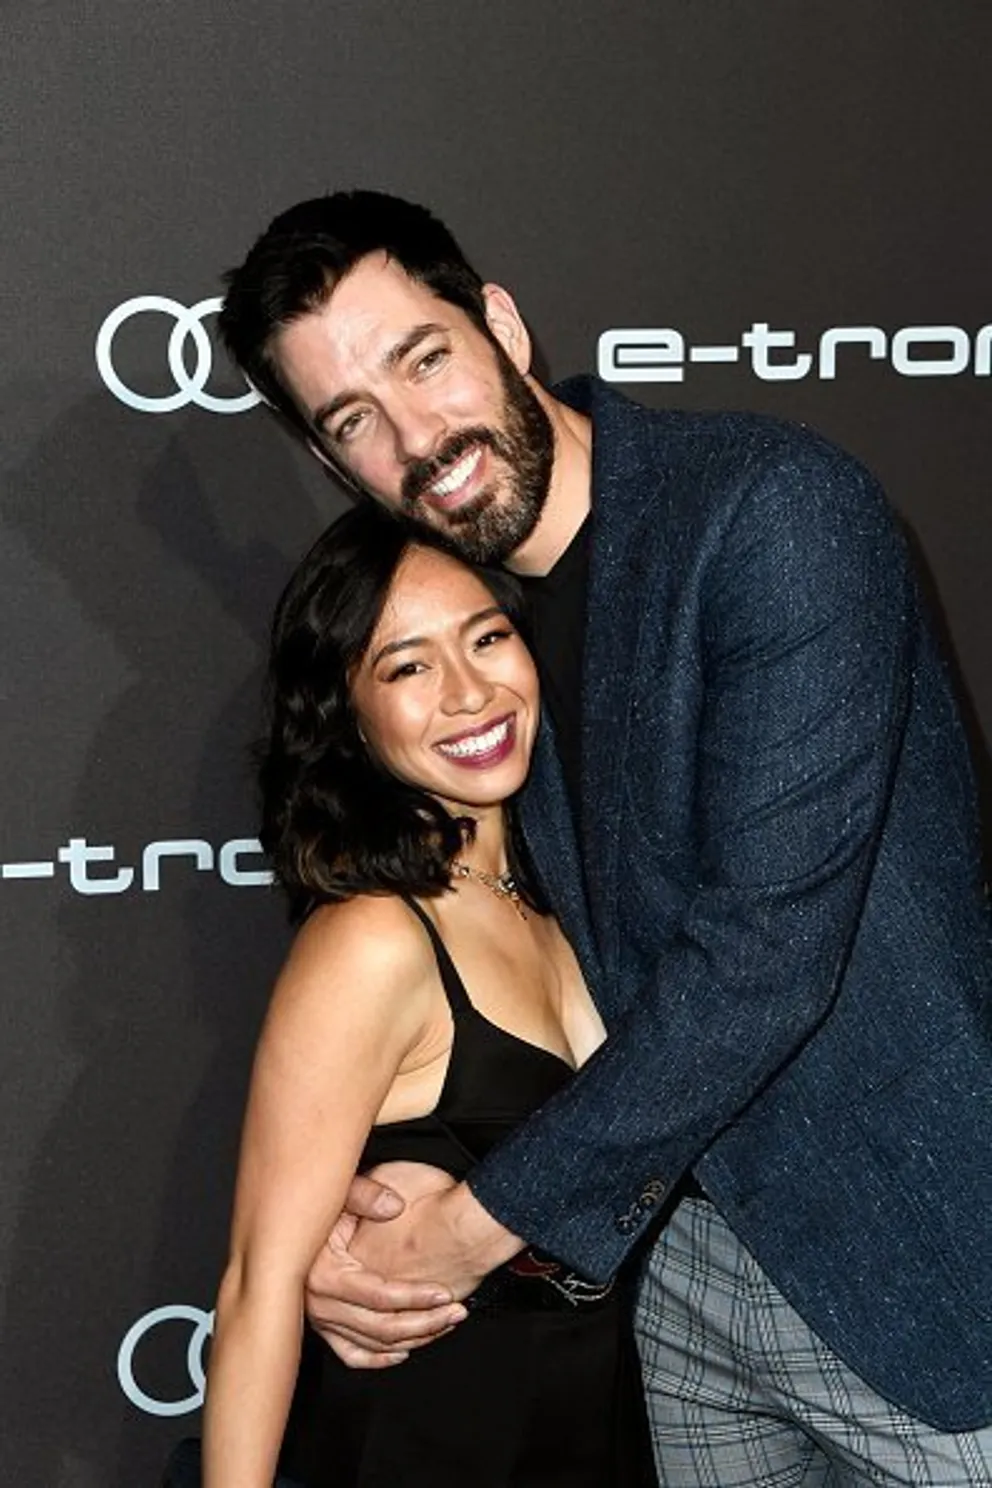 Linda Phan and Drew Scott at Sunset Tower on September 19, 2019 in Los Angeles, California. | Photo: Getty Images